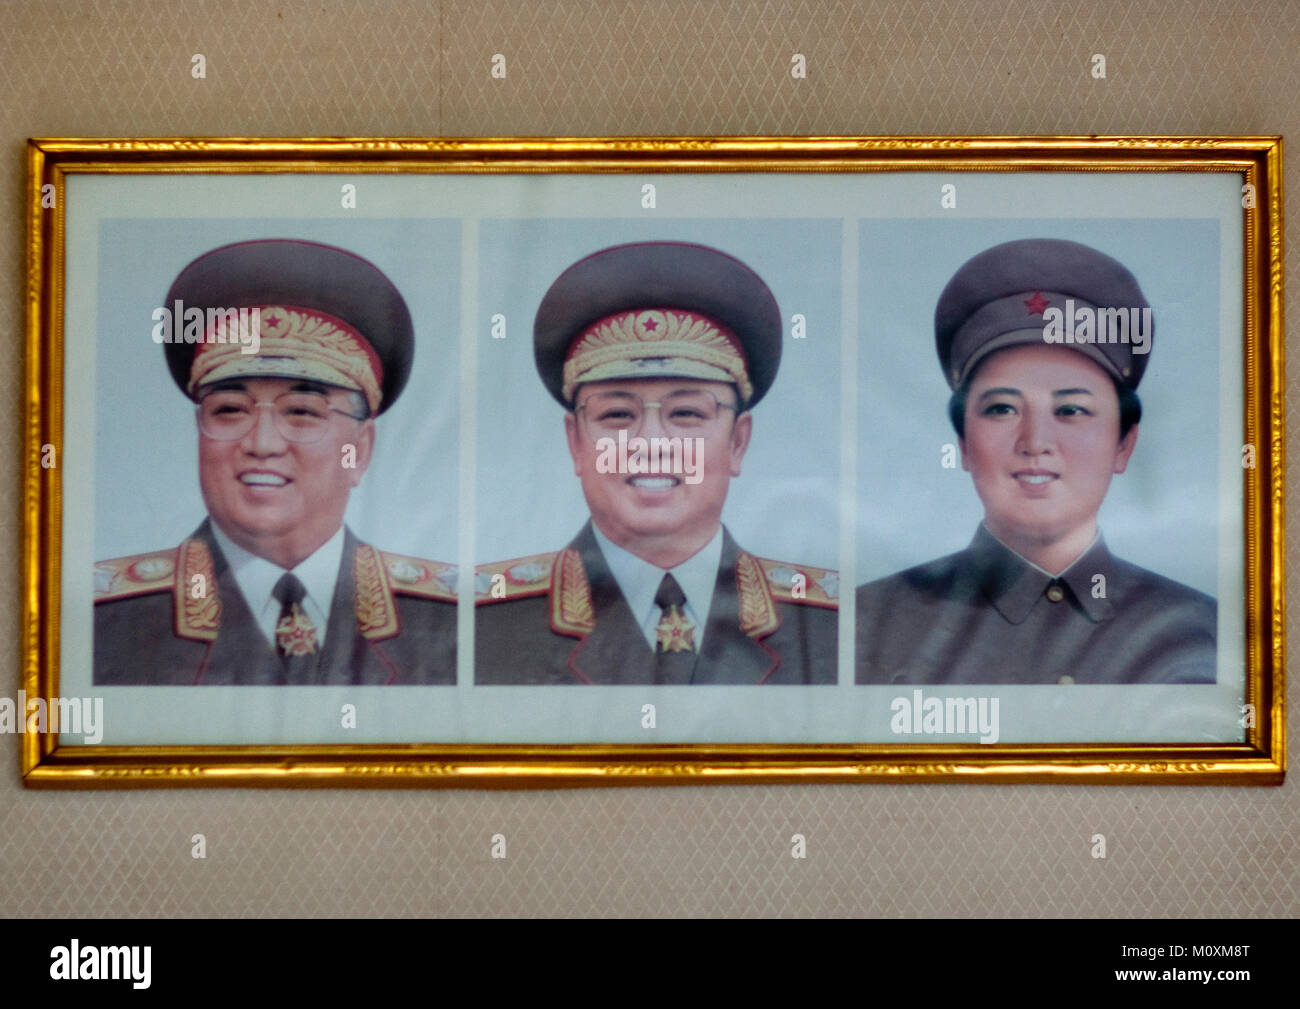 Official portraits of the Dear Leaders and Kim Jong suk in military uniforms, North Hamgyong Province, Jung Pyong Ri, North Korea Stock Photo